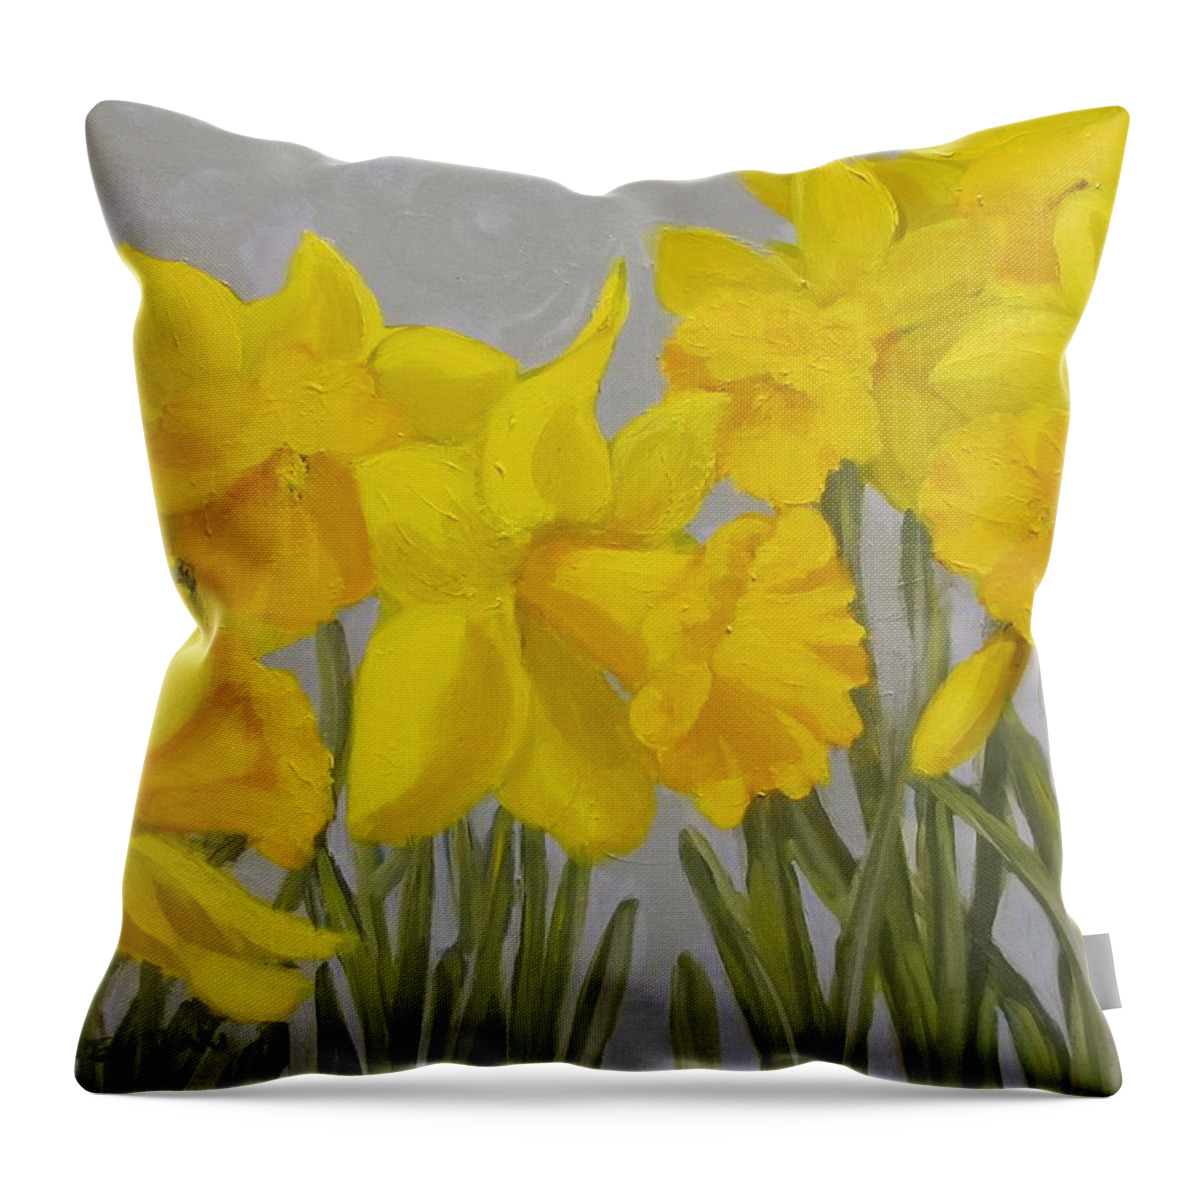 Flowers Throw Pillow featuring the painting Spring by Karen Ilari